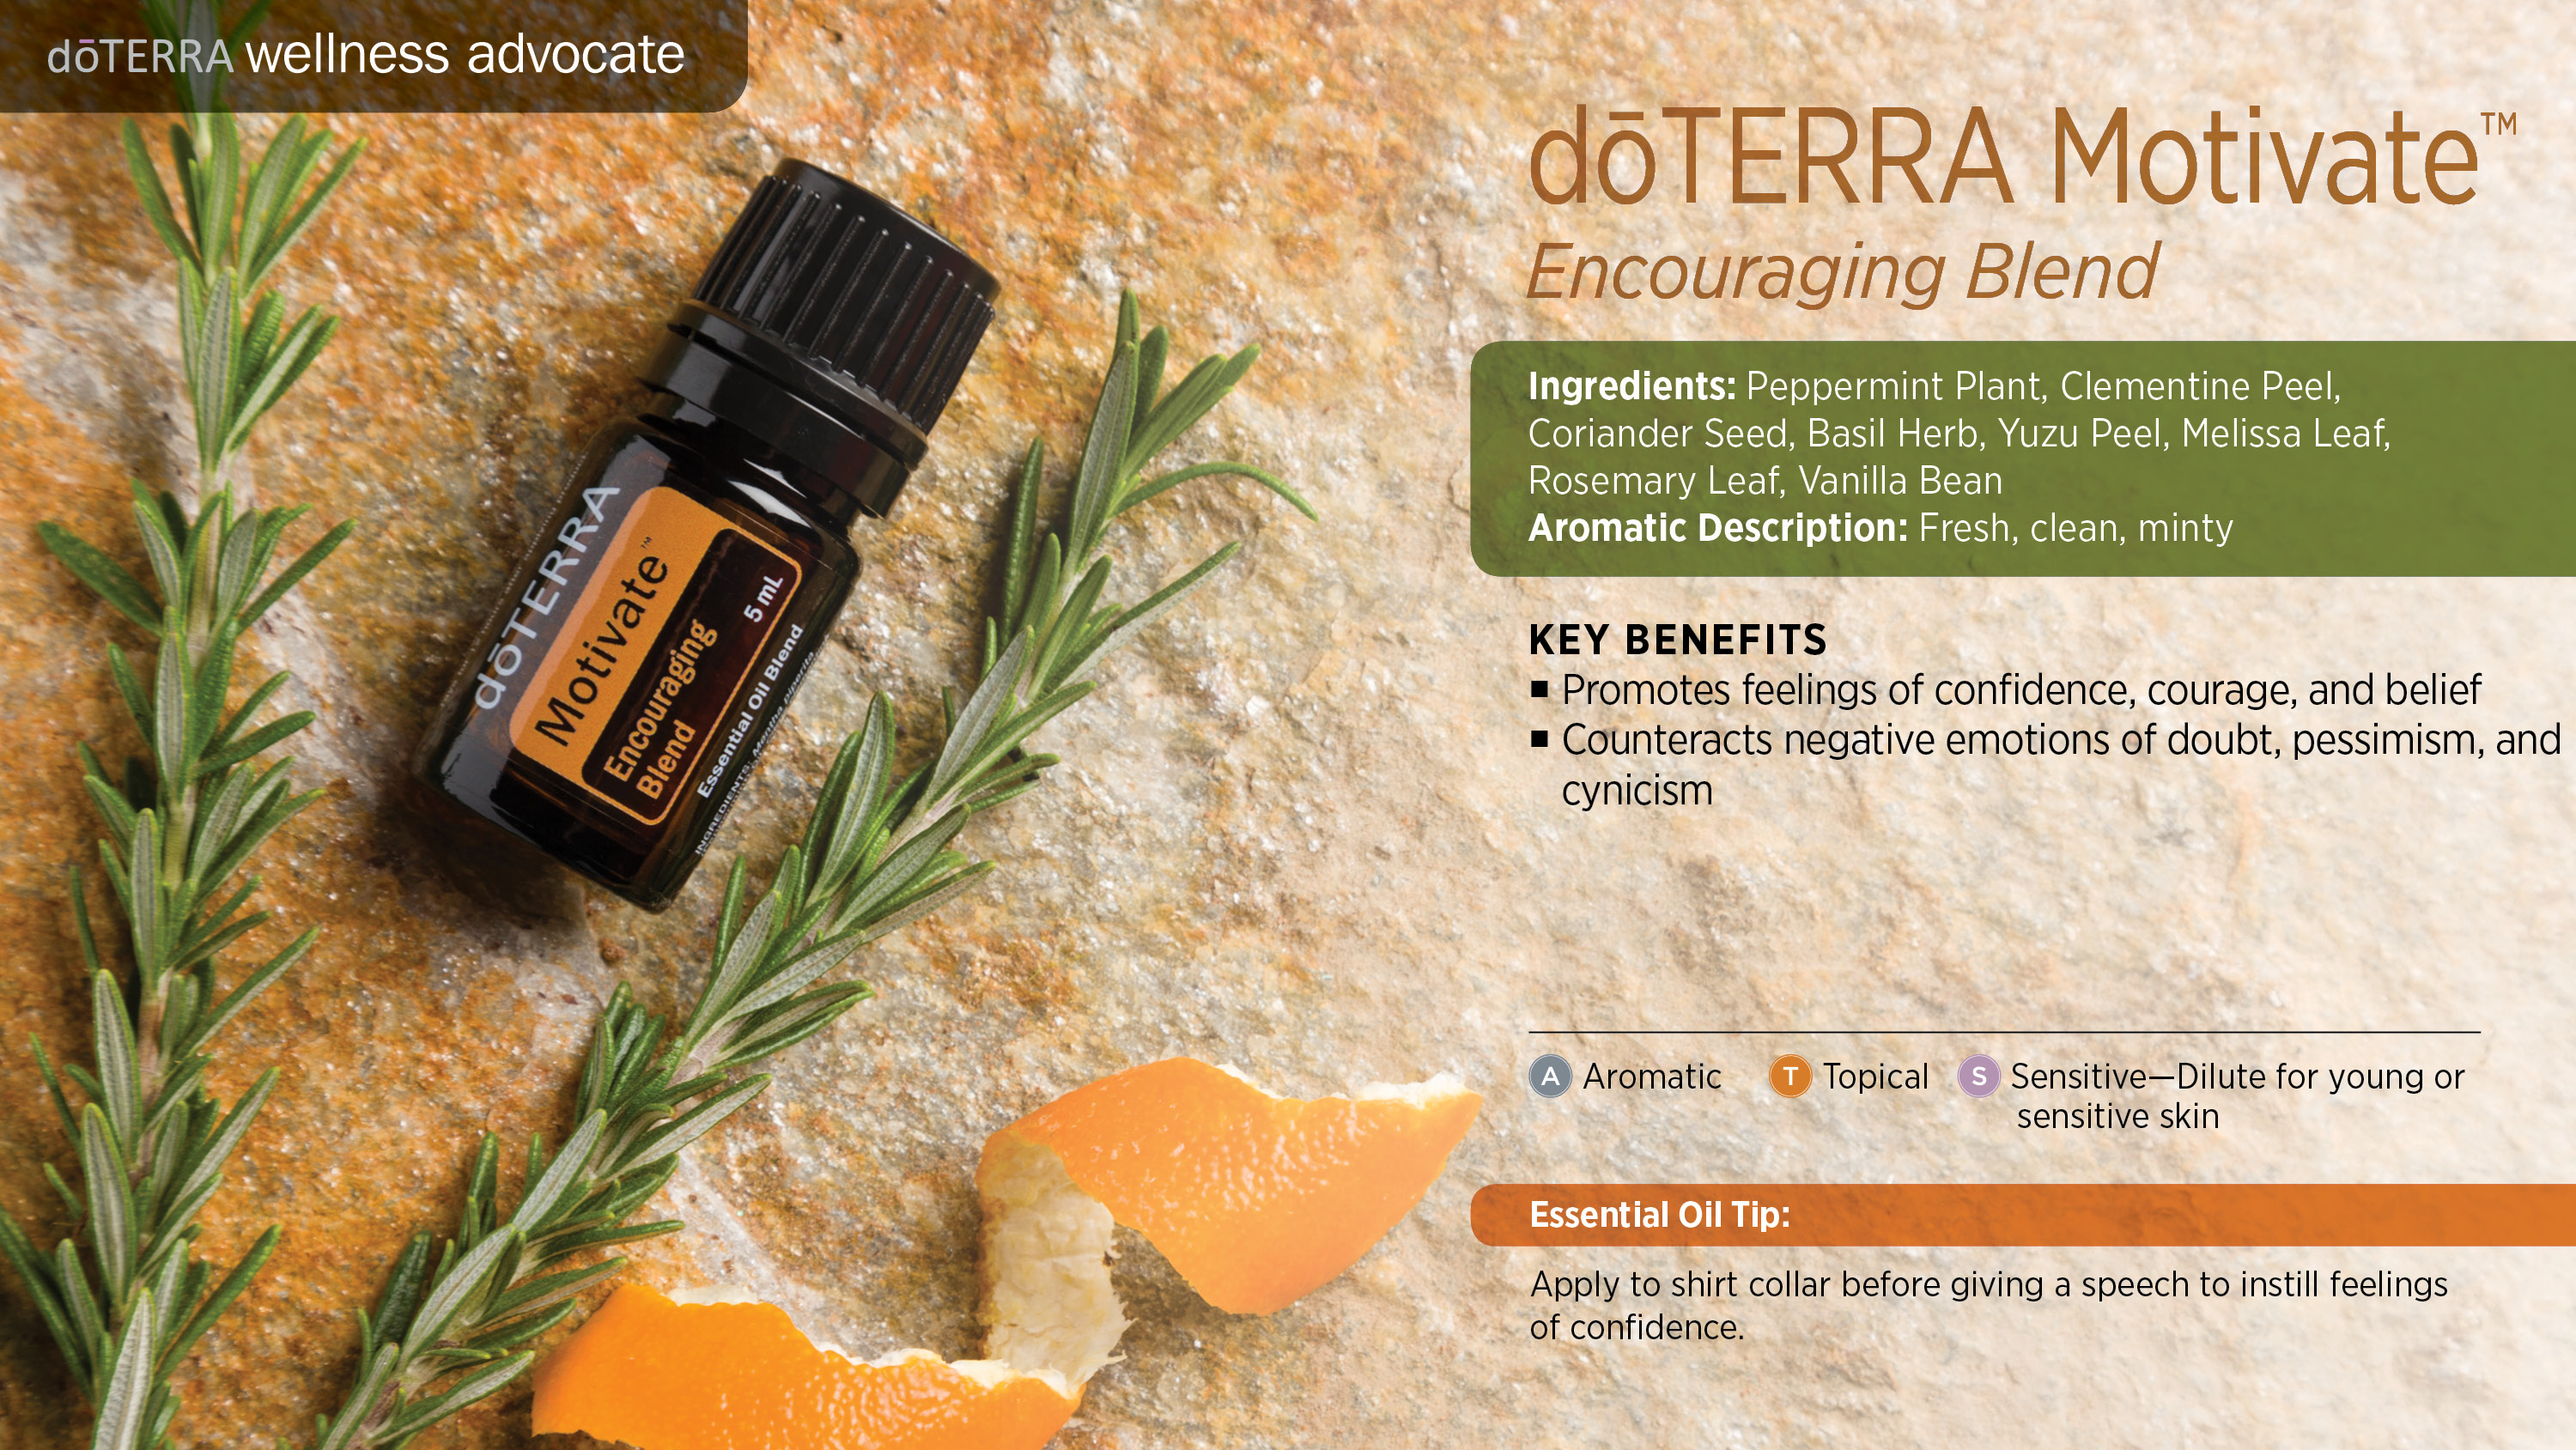 doTERRA Wellness Advocate: get 25% discount for all the essential oils!   Aceites esenciales usos, Recetas de aceites esenciales, Hacer aceites  esenciales